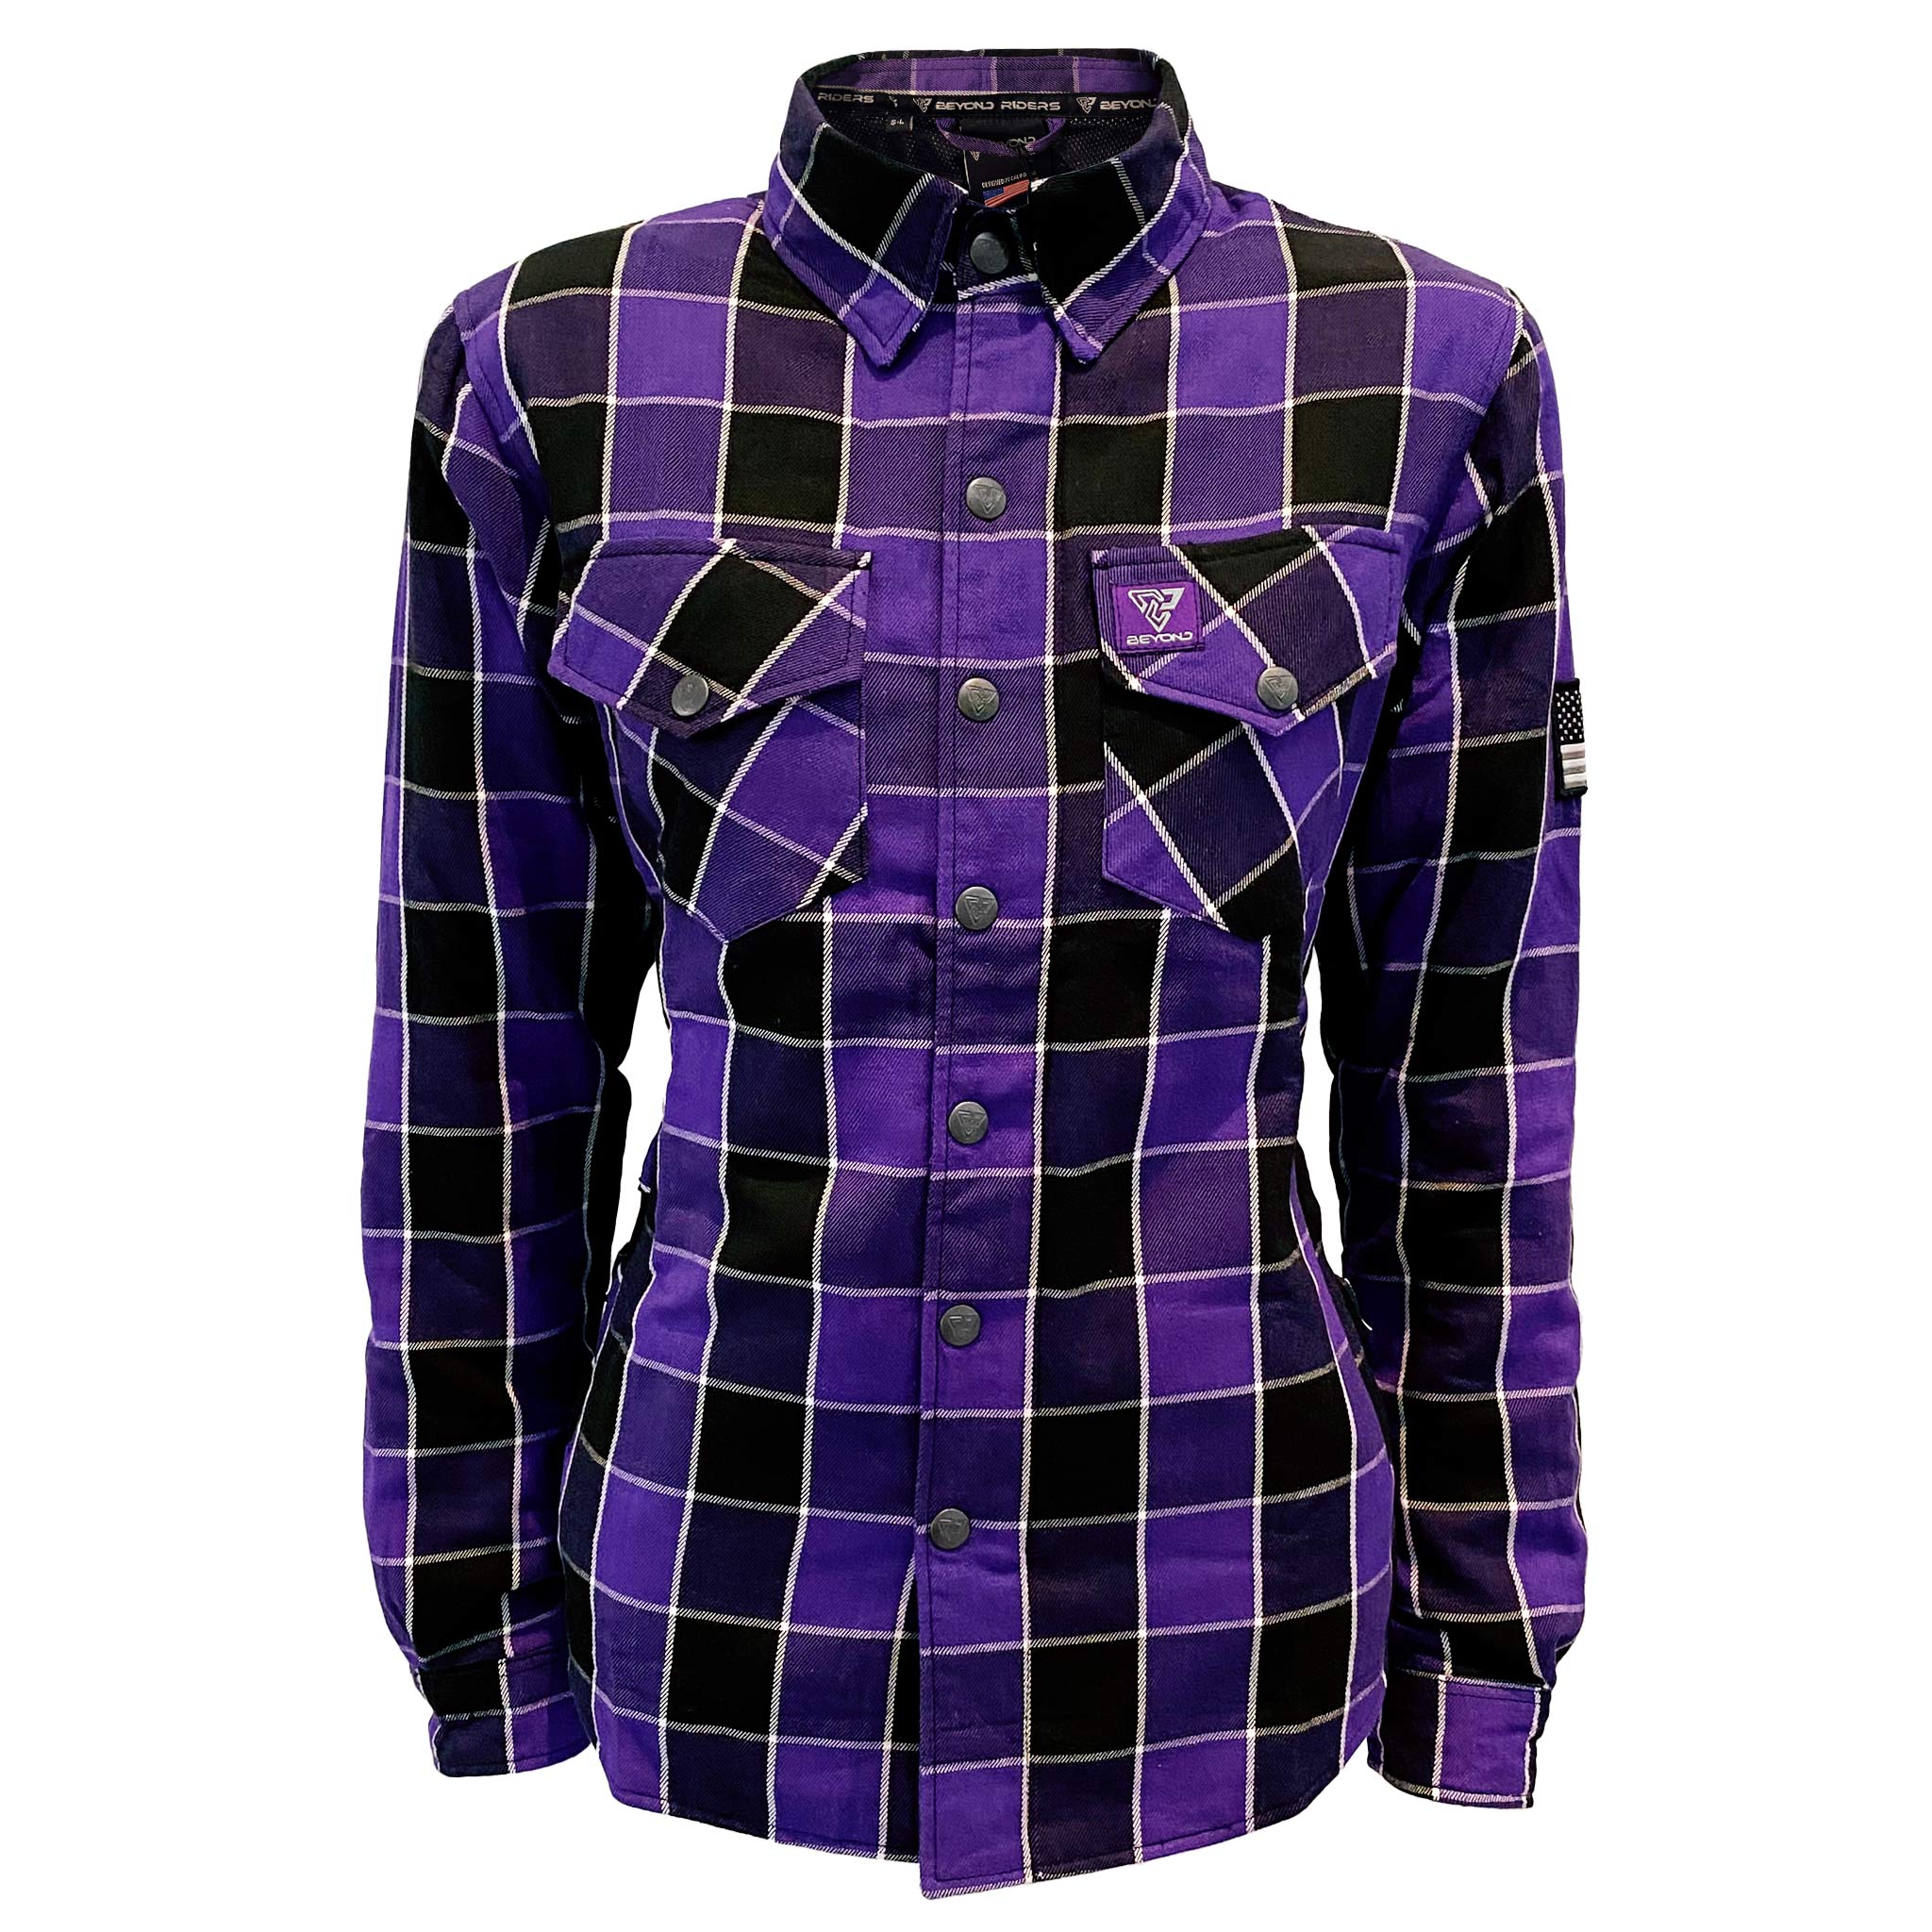 Women's-Flannel-Shirt-Purple-Black-Checkered-And-White-Strips-Front